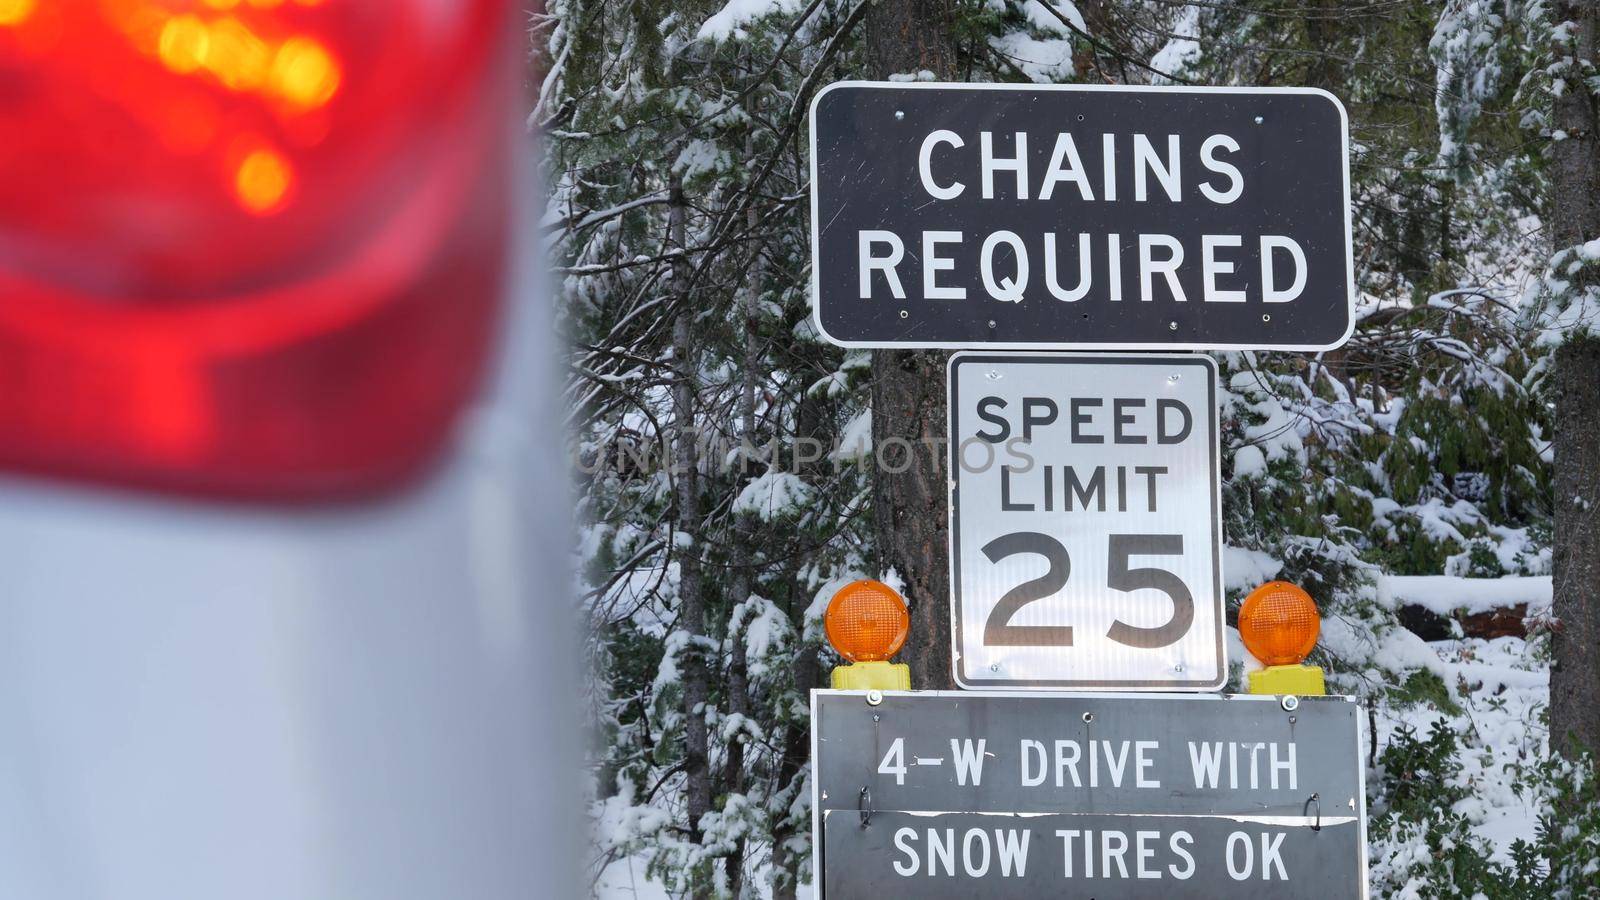 Chains or snow tires required road sign, Yosemite winter forest, California USA. by DogoraSun